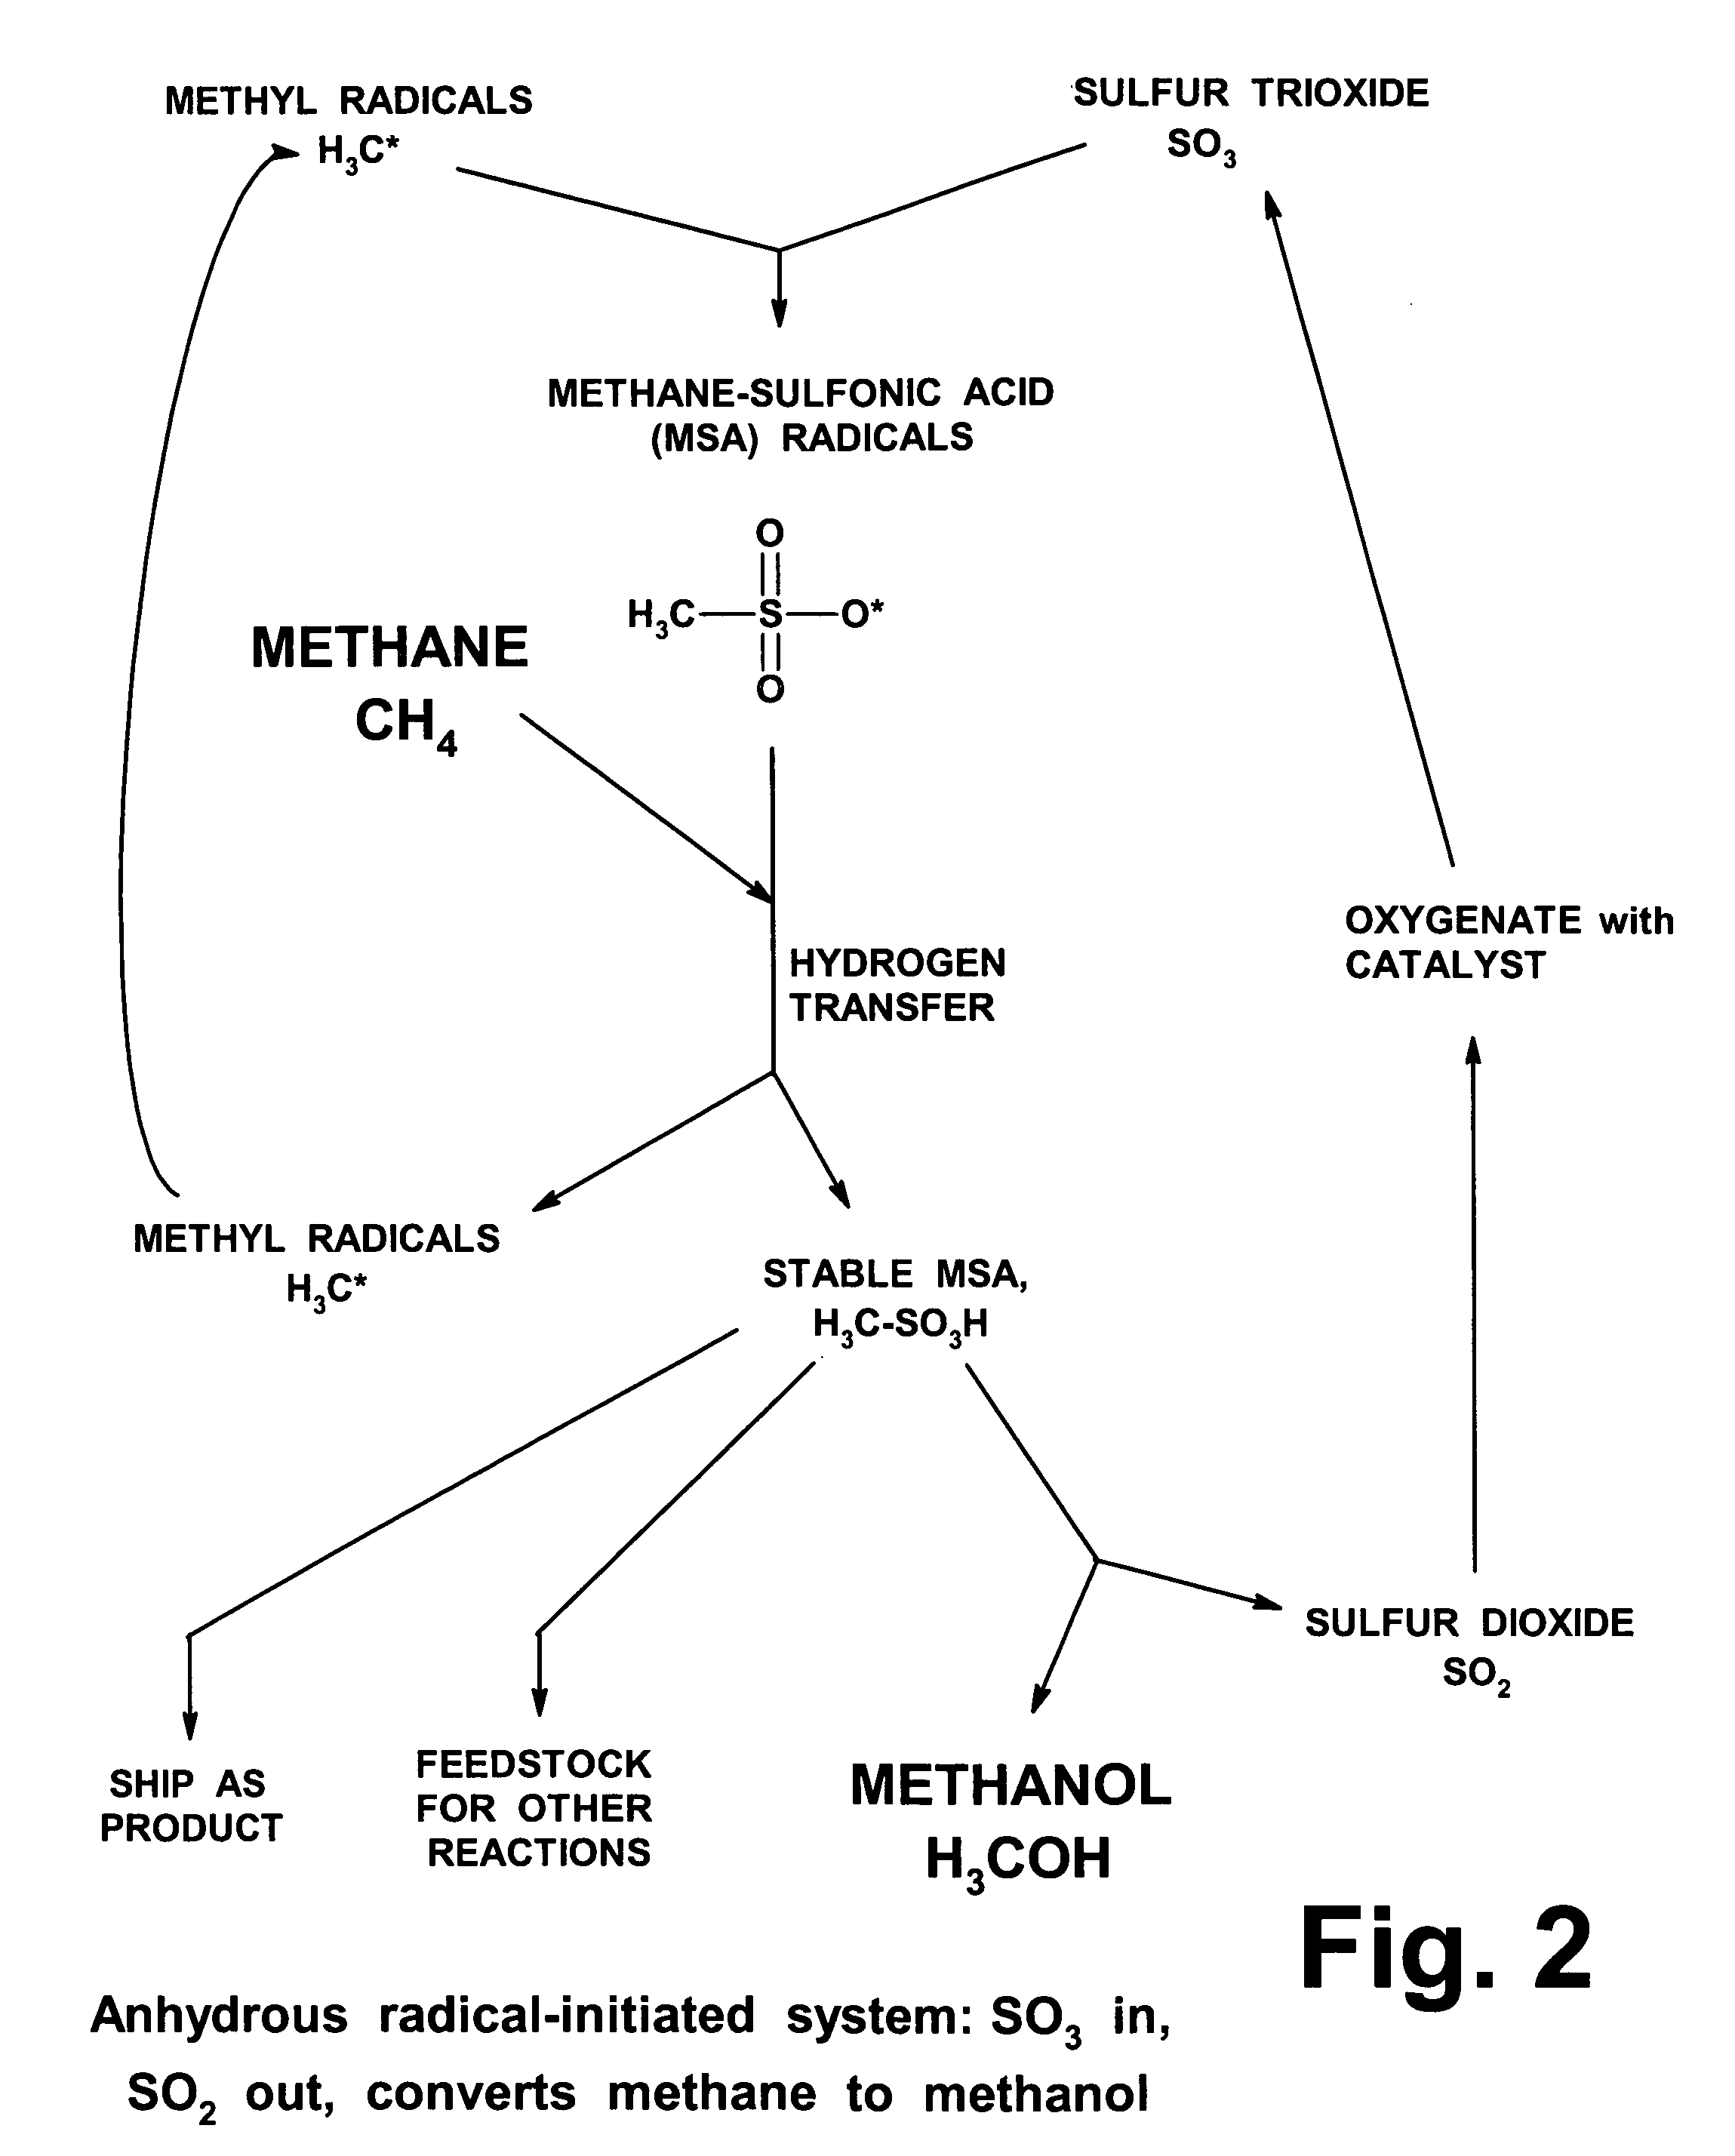 Anhydrous processing of methane into methane-sulfonic acid, methanol, and other compounds